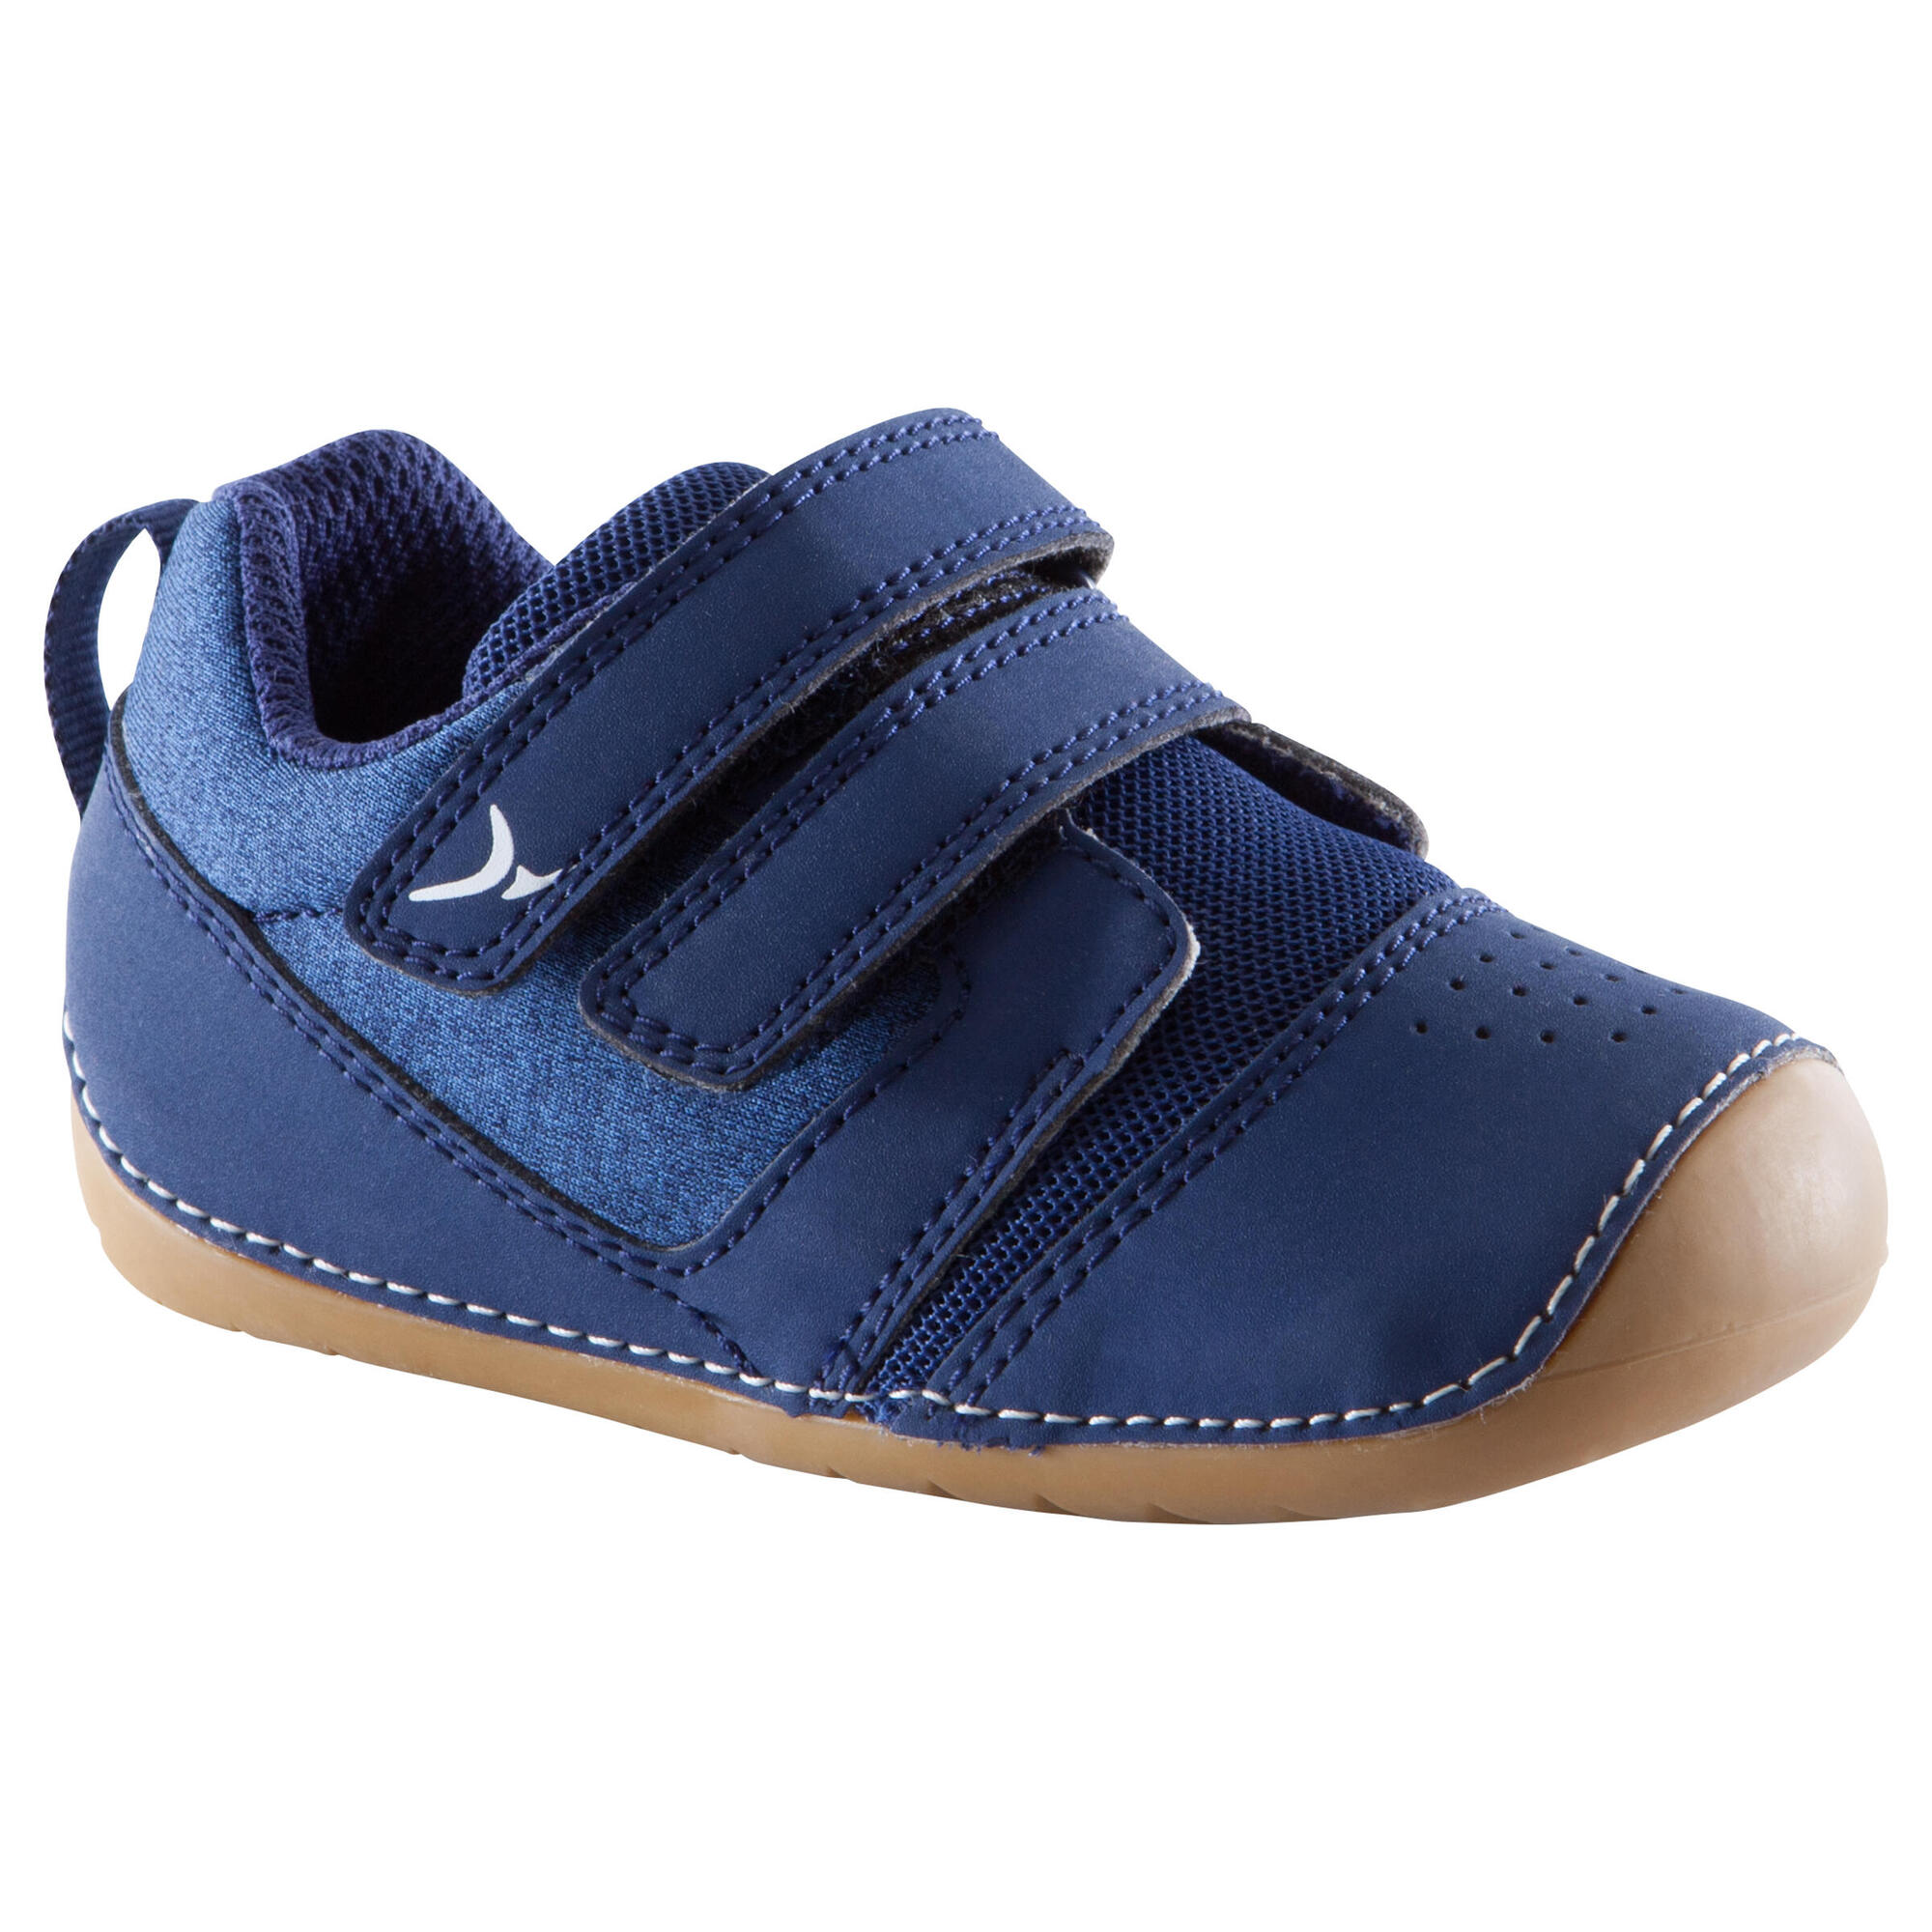 500 I Learn Gym Shoes - Navy Blue/Brown 